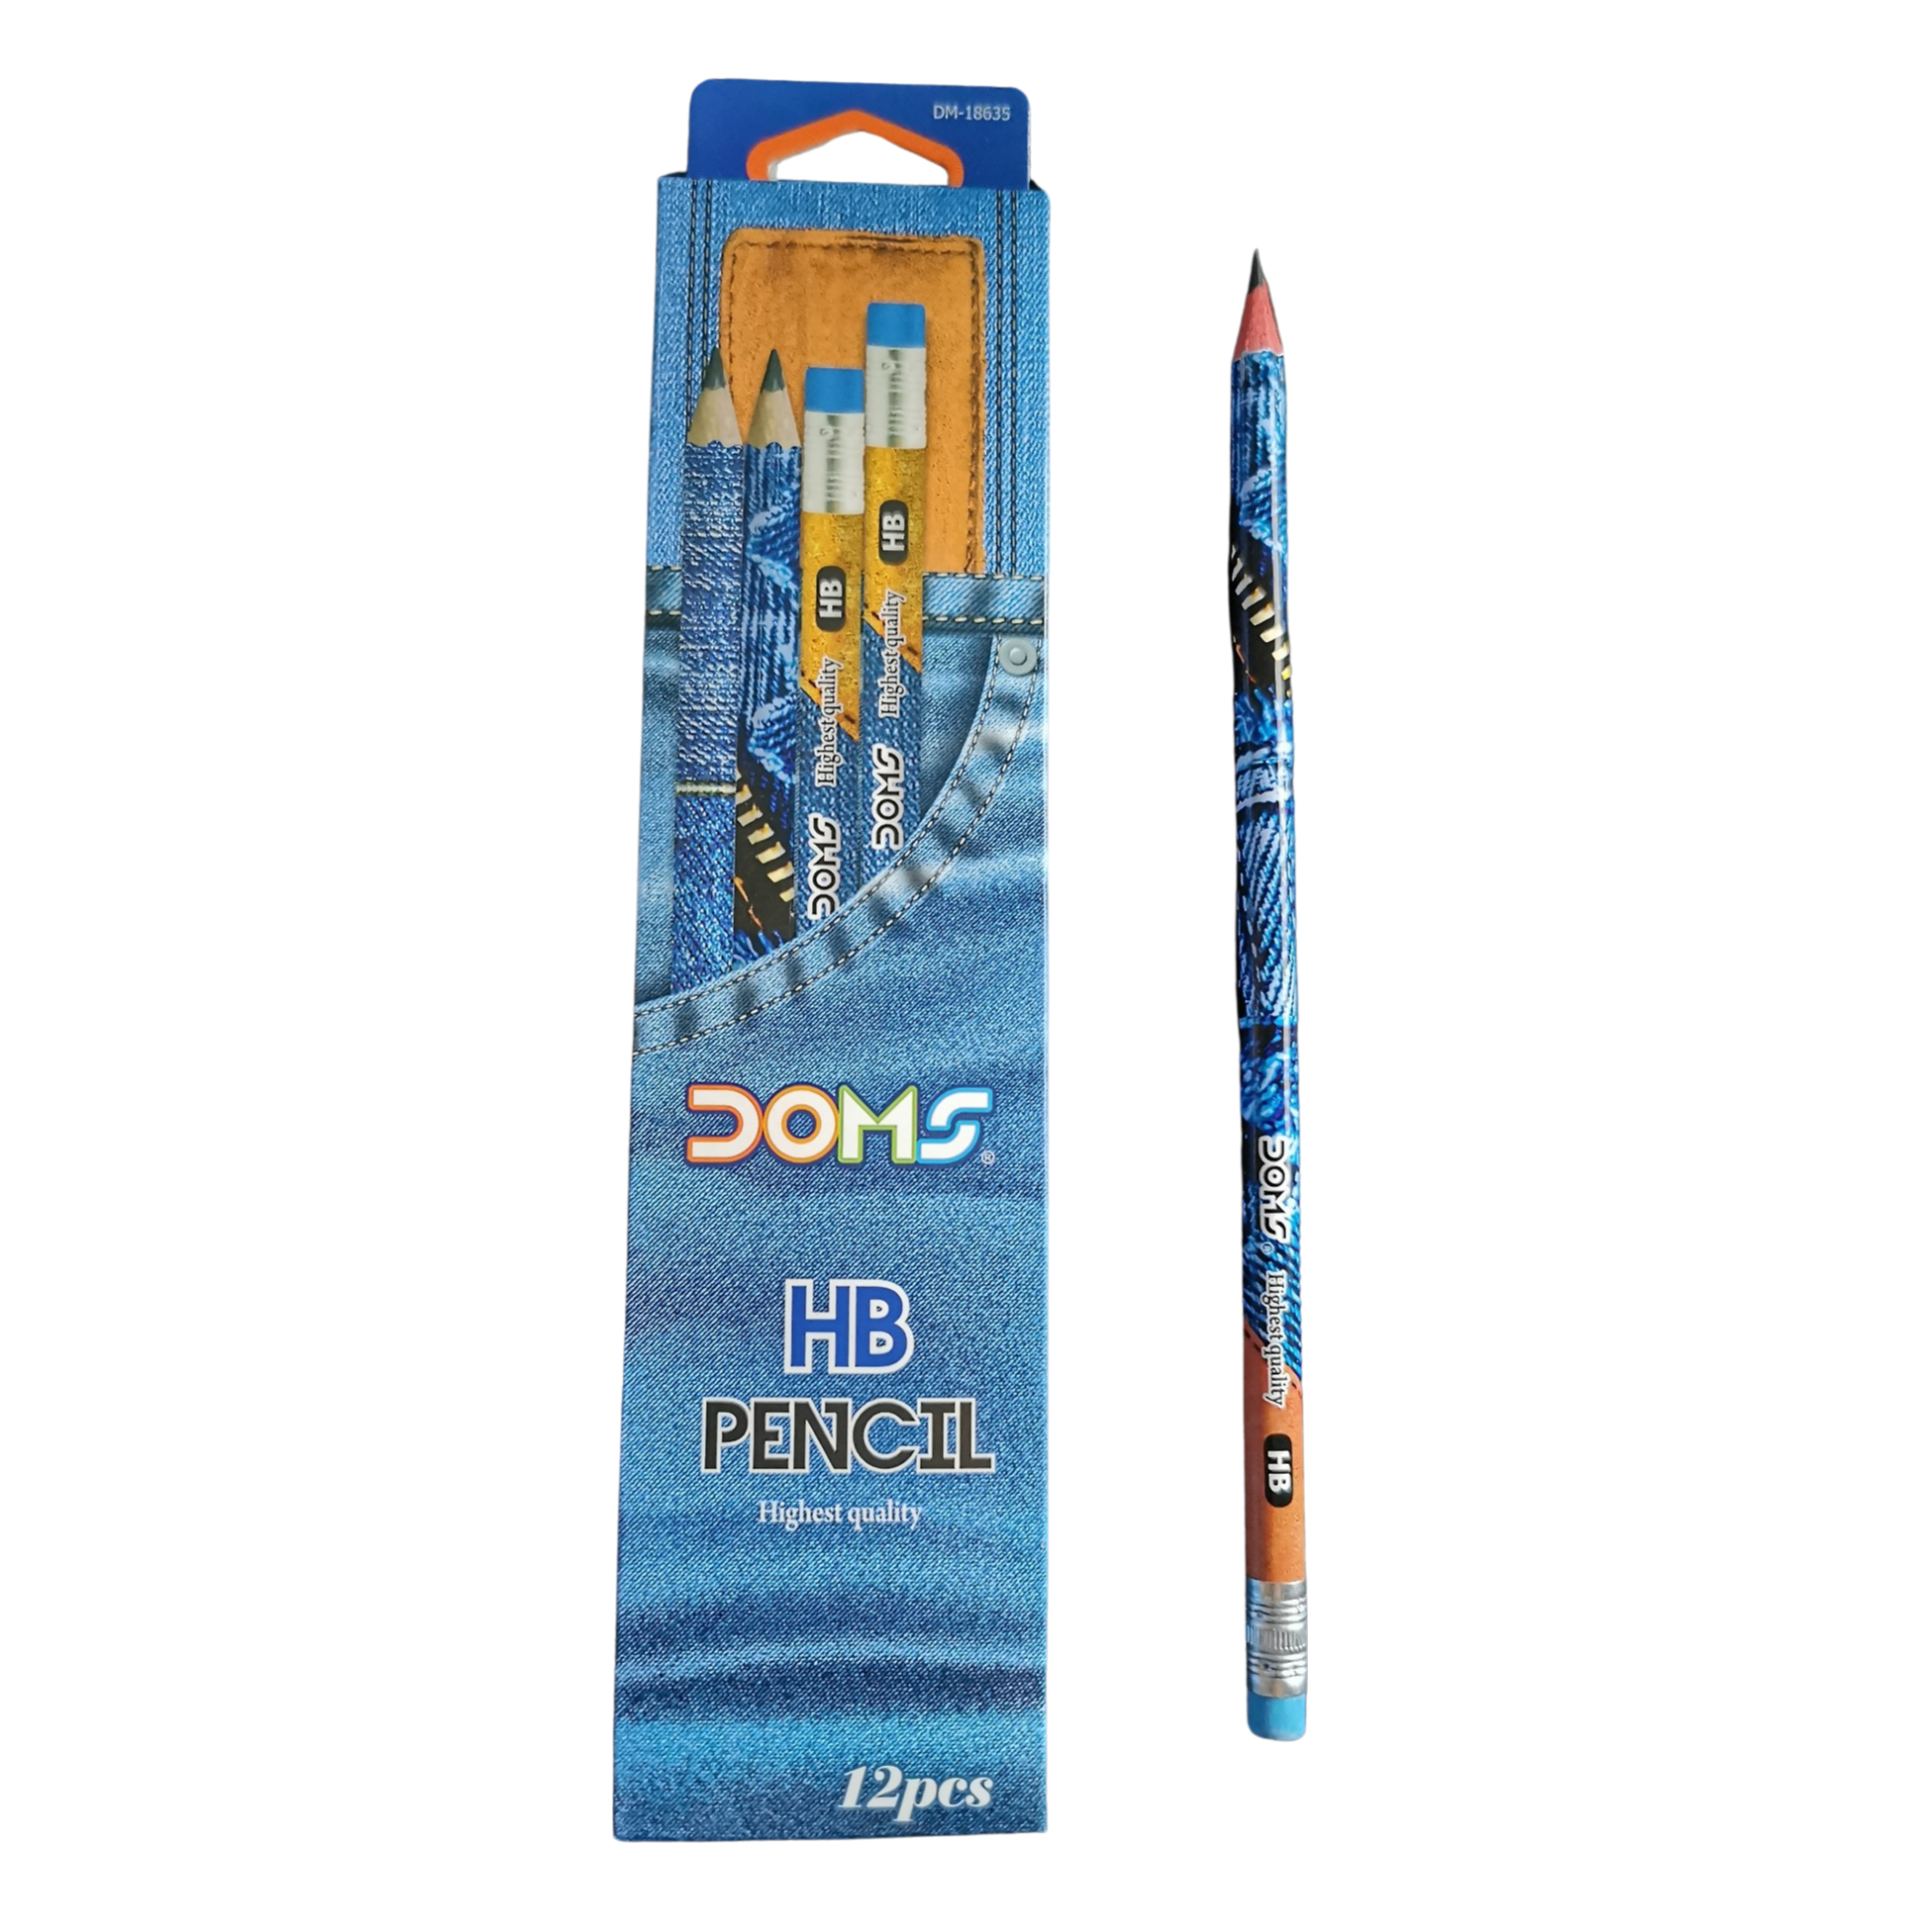 DOMS High Quality pencil , HB, Jeansy , (1 pencil)